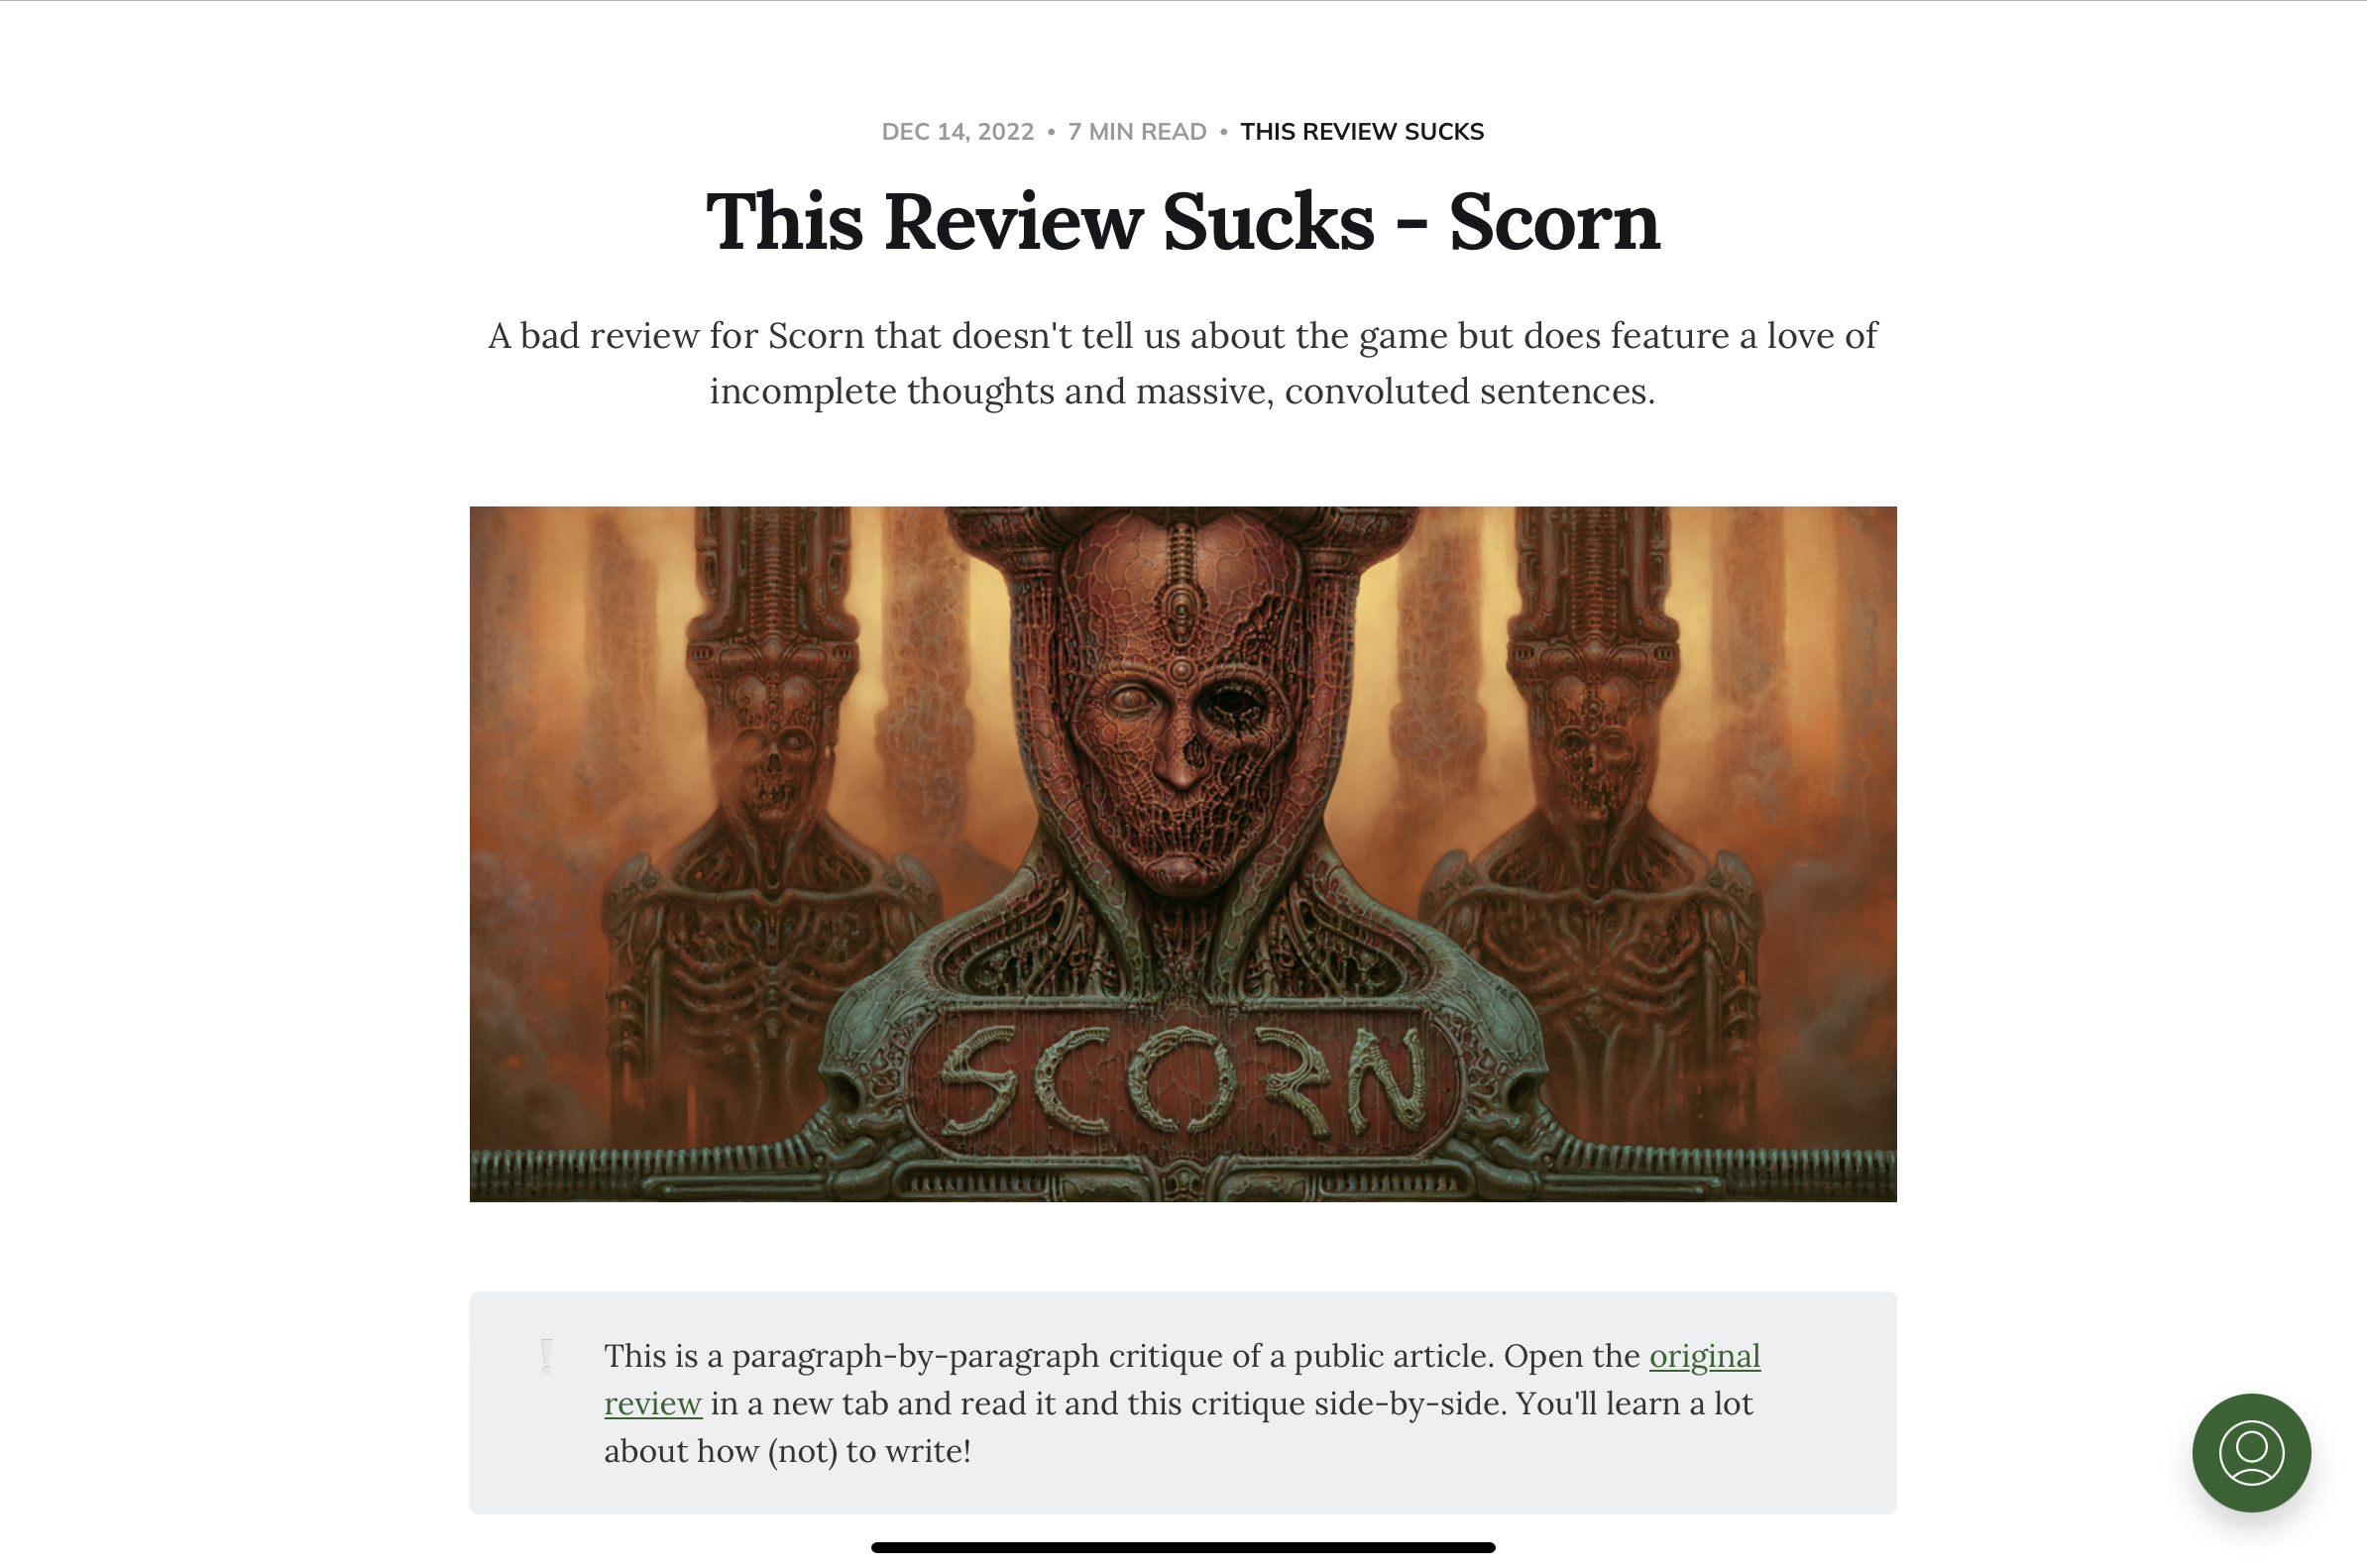 This Review of a Review Sucks